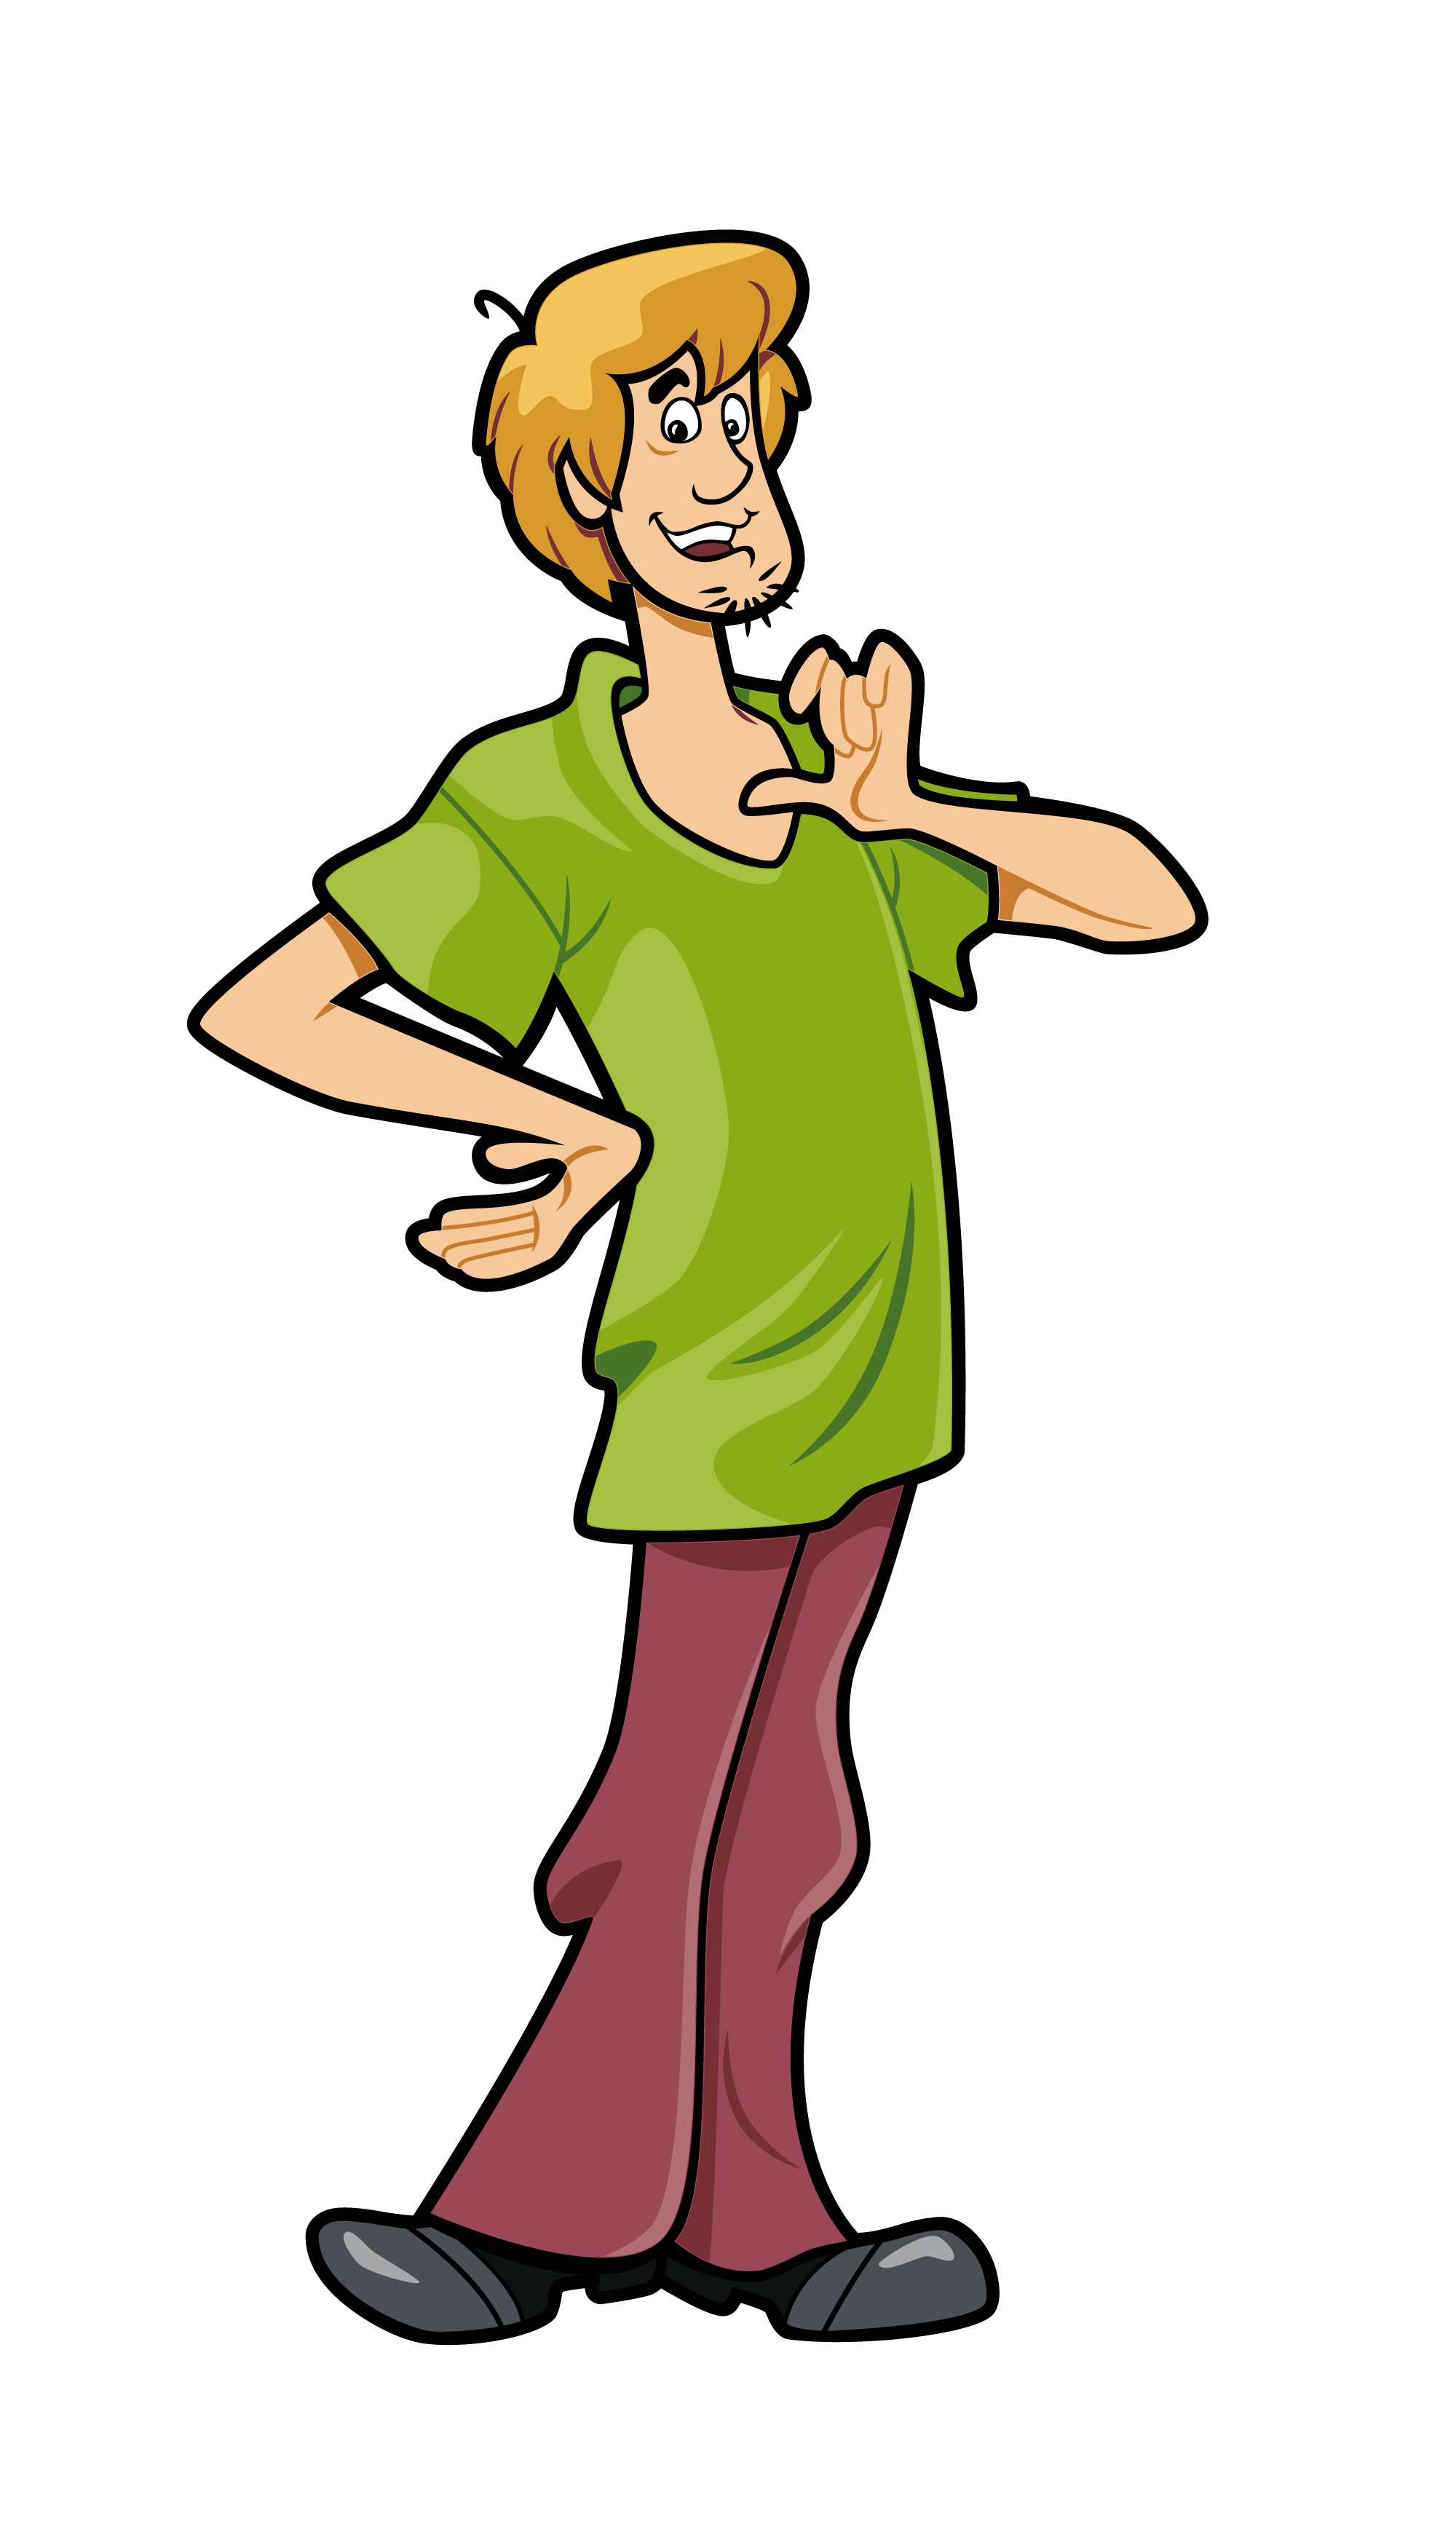 Shaggy Rogers (719) – FiGPiN